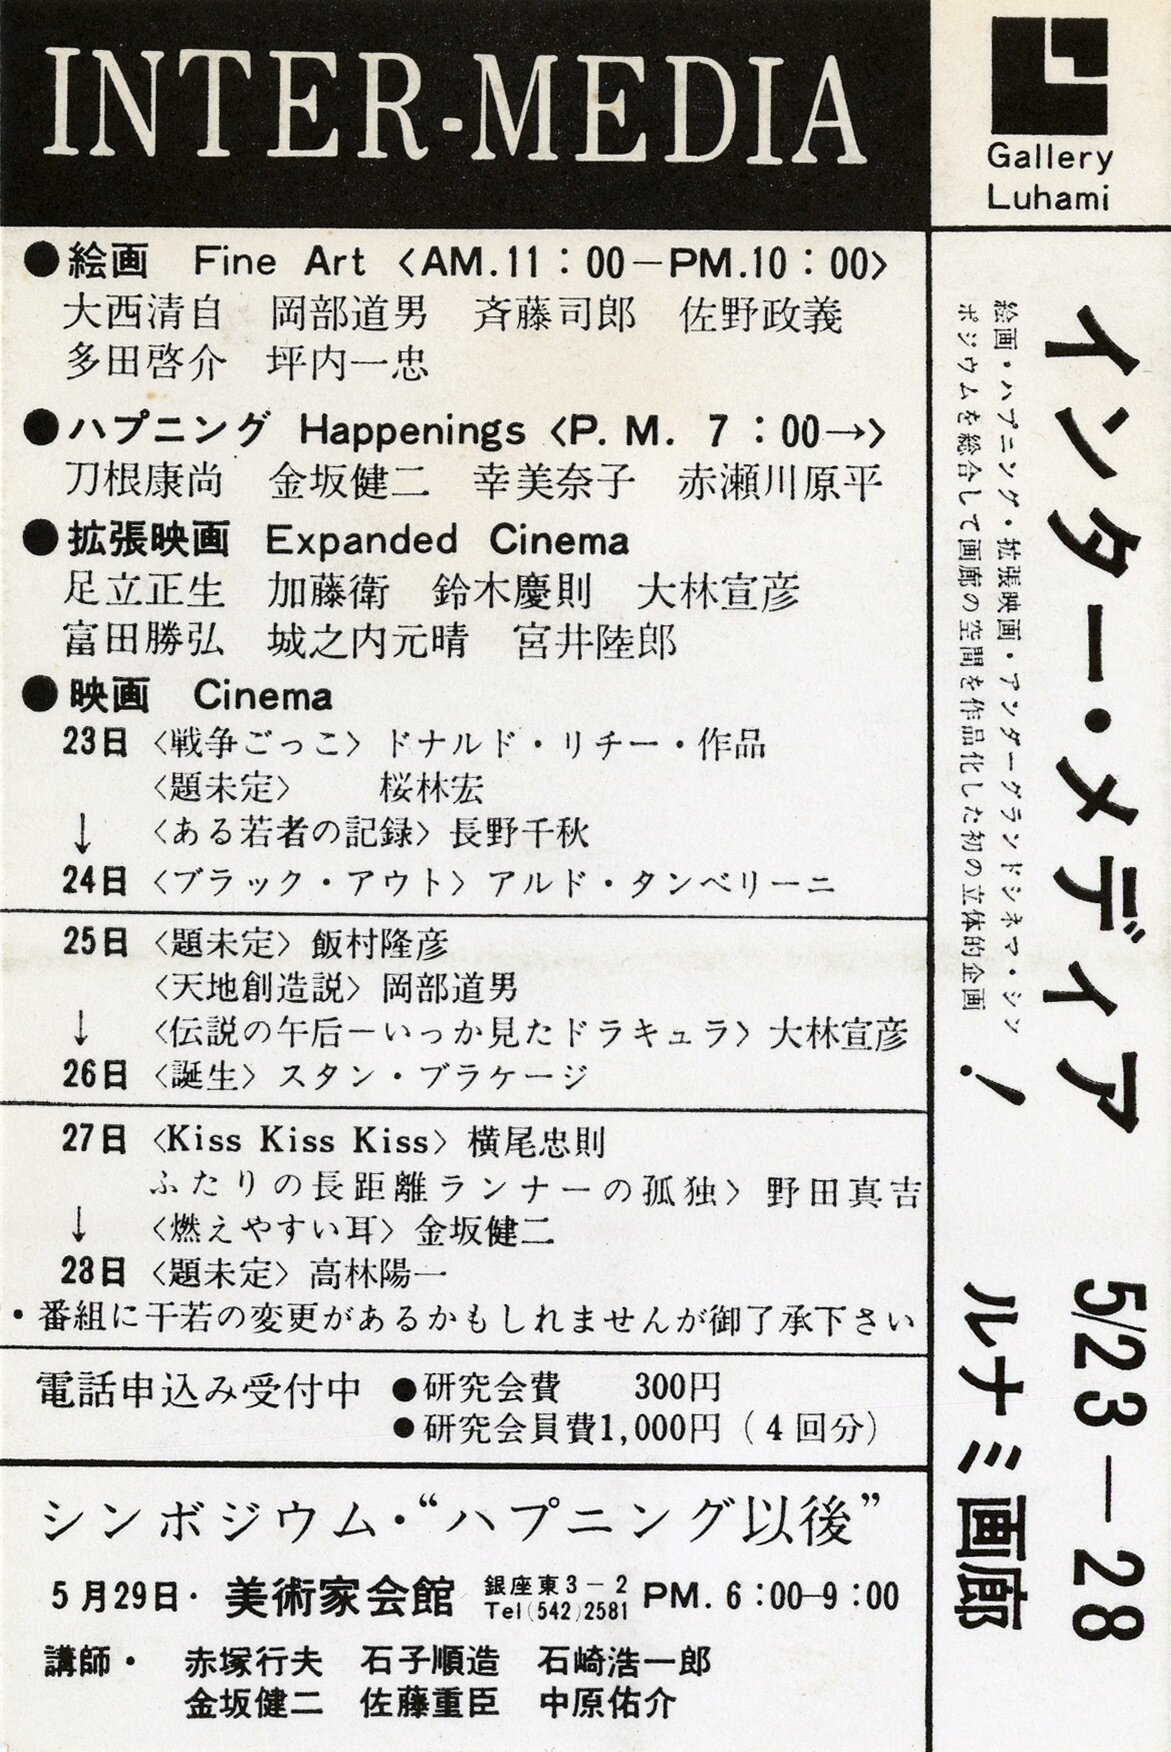  Postcard for Second Lunami Film Gallery, 1967, Scanned reference material. Collection of Emiko Namikawa 